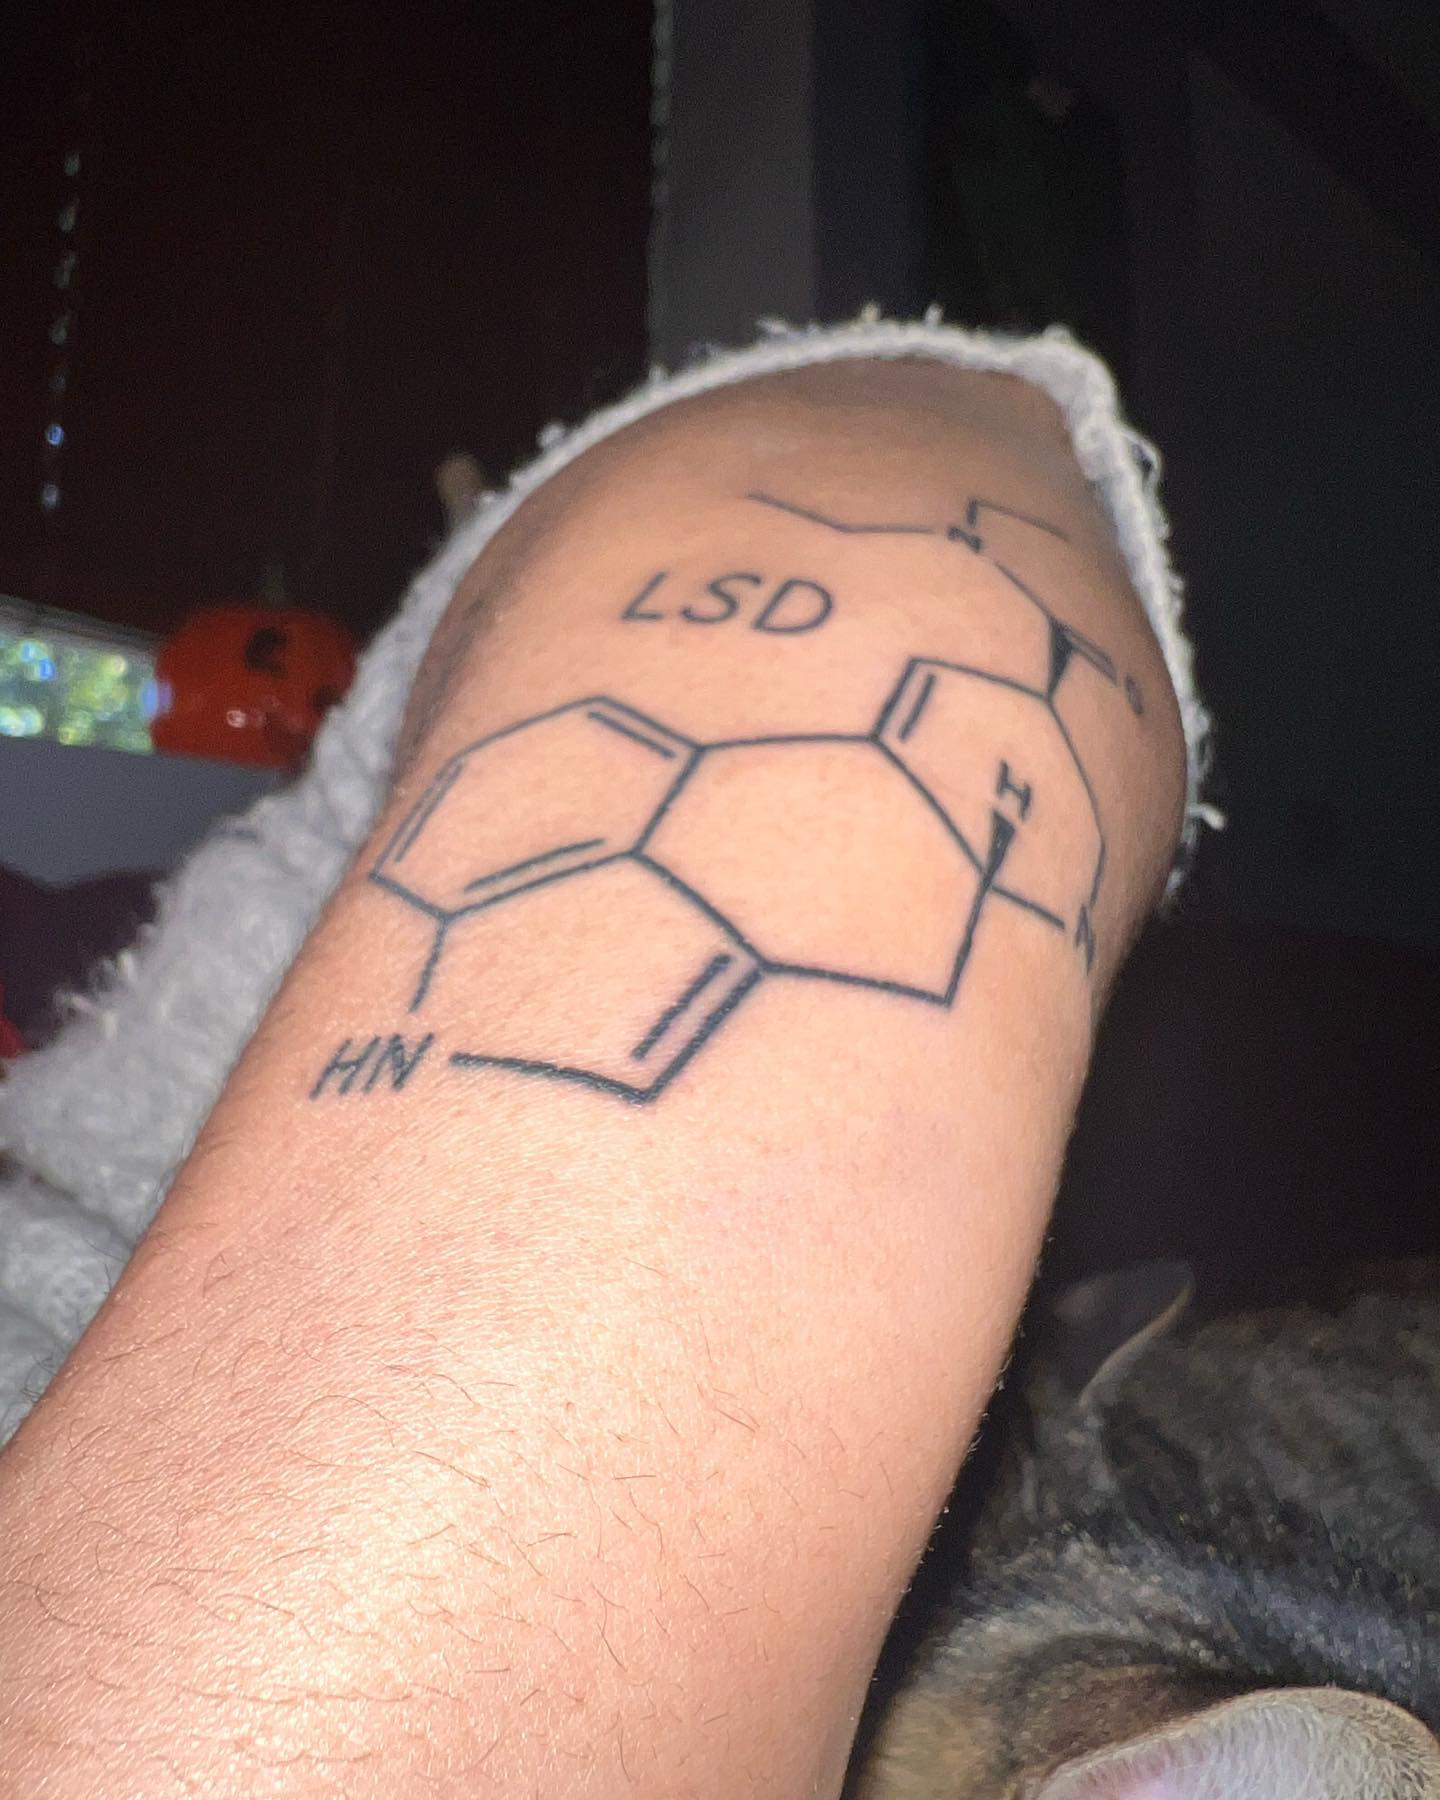 Matching tattoos with my husband 🤍
#LSD is more than just a drug. It has had such a huge impact on each of our lives as individuals and as a couple. What better way to memorialize the importance of it. 
Lysergic Acid Diethylamide isn’t just a drug. It’s a much more helpful tool, when used the right way, than most would think. I have never felt more grounded, down to earth and closer to myself than I do while I’m tripping. It resparks the connection between me and reality. It shows me that there is more to this plain than what we see. I become so much more social, when I normally suffer from social anxiety. The dark, brooding thoughts that drain me daily dissipate from my mind and it becomes quite or filled with my favorite tune. #acid can and should be used for health remedies. There’s a reason the government makes it illegal; #ifyouknowyouknow 

Huge huge shout out to @alyssa.tattoos for the amazing work she did! I am still so amazed and the line work of this tattoo! Not a jagged or crooked like in sight. 10/10 definitely recommend. She’s a total sweetheart and her artwork is beautiful as well! 🫶🏽

#lysergic #acid #diethylamide #matchingtattoos #linework #lineworktattoo #tattoo #molecular #moleculartattoo #molecules